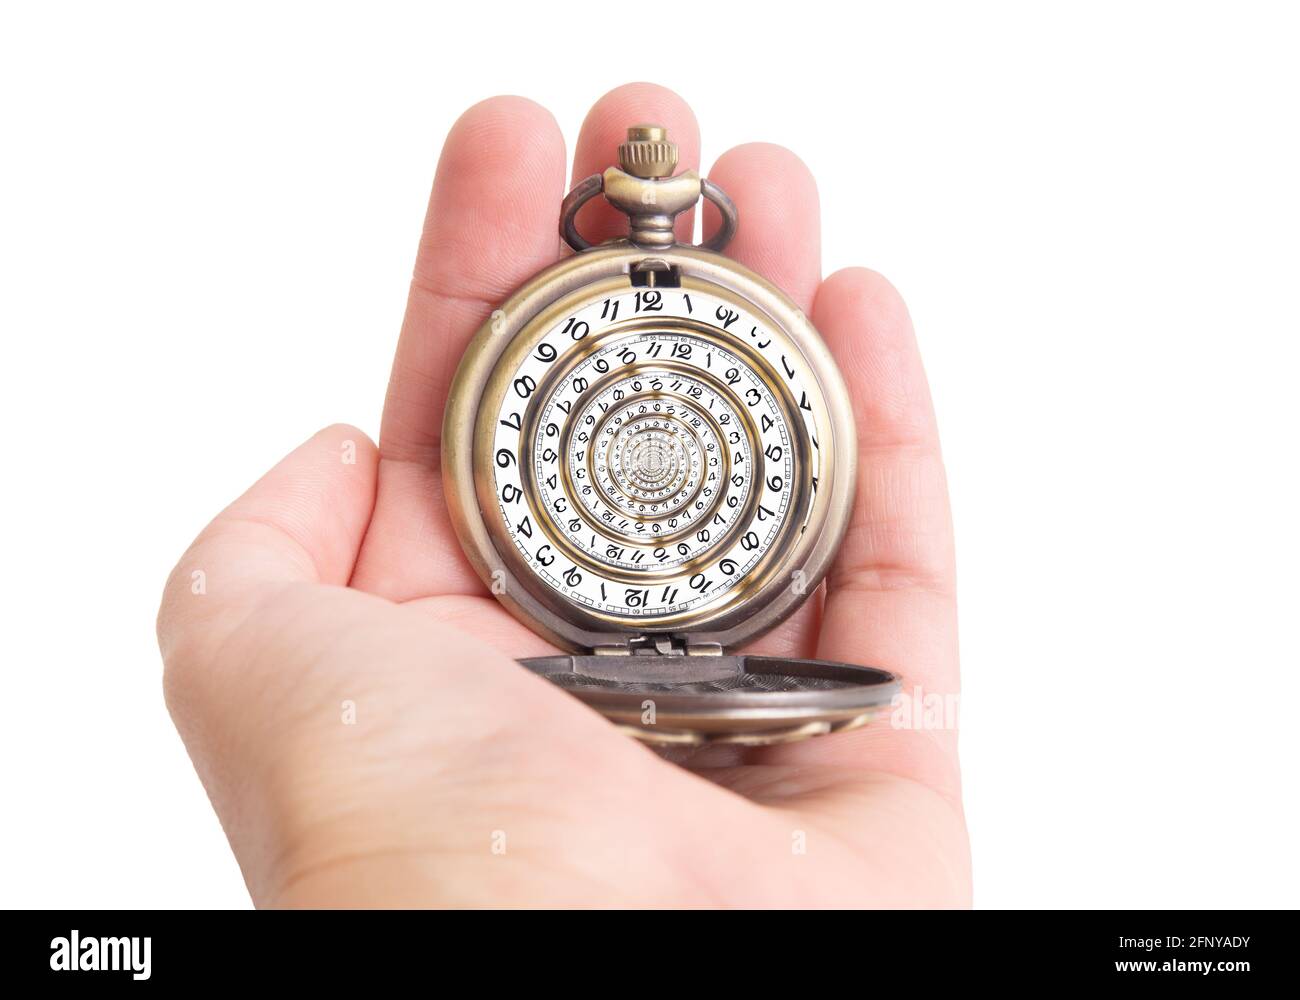 Human hand holding an antique pocket watch with a swirled watch face. Droste effect, creative time loop concept. Stock Photo